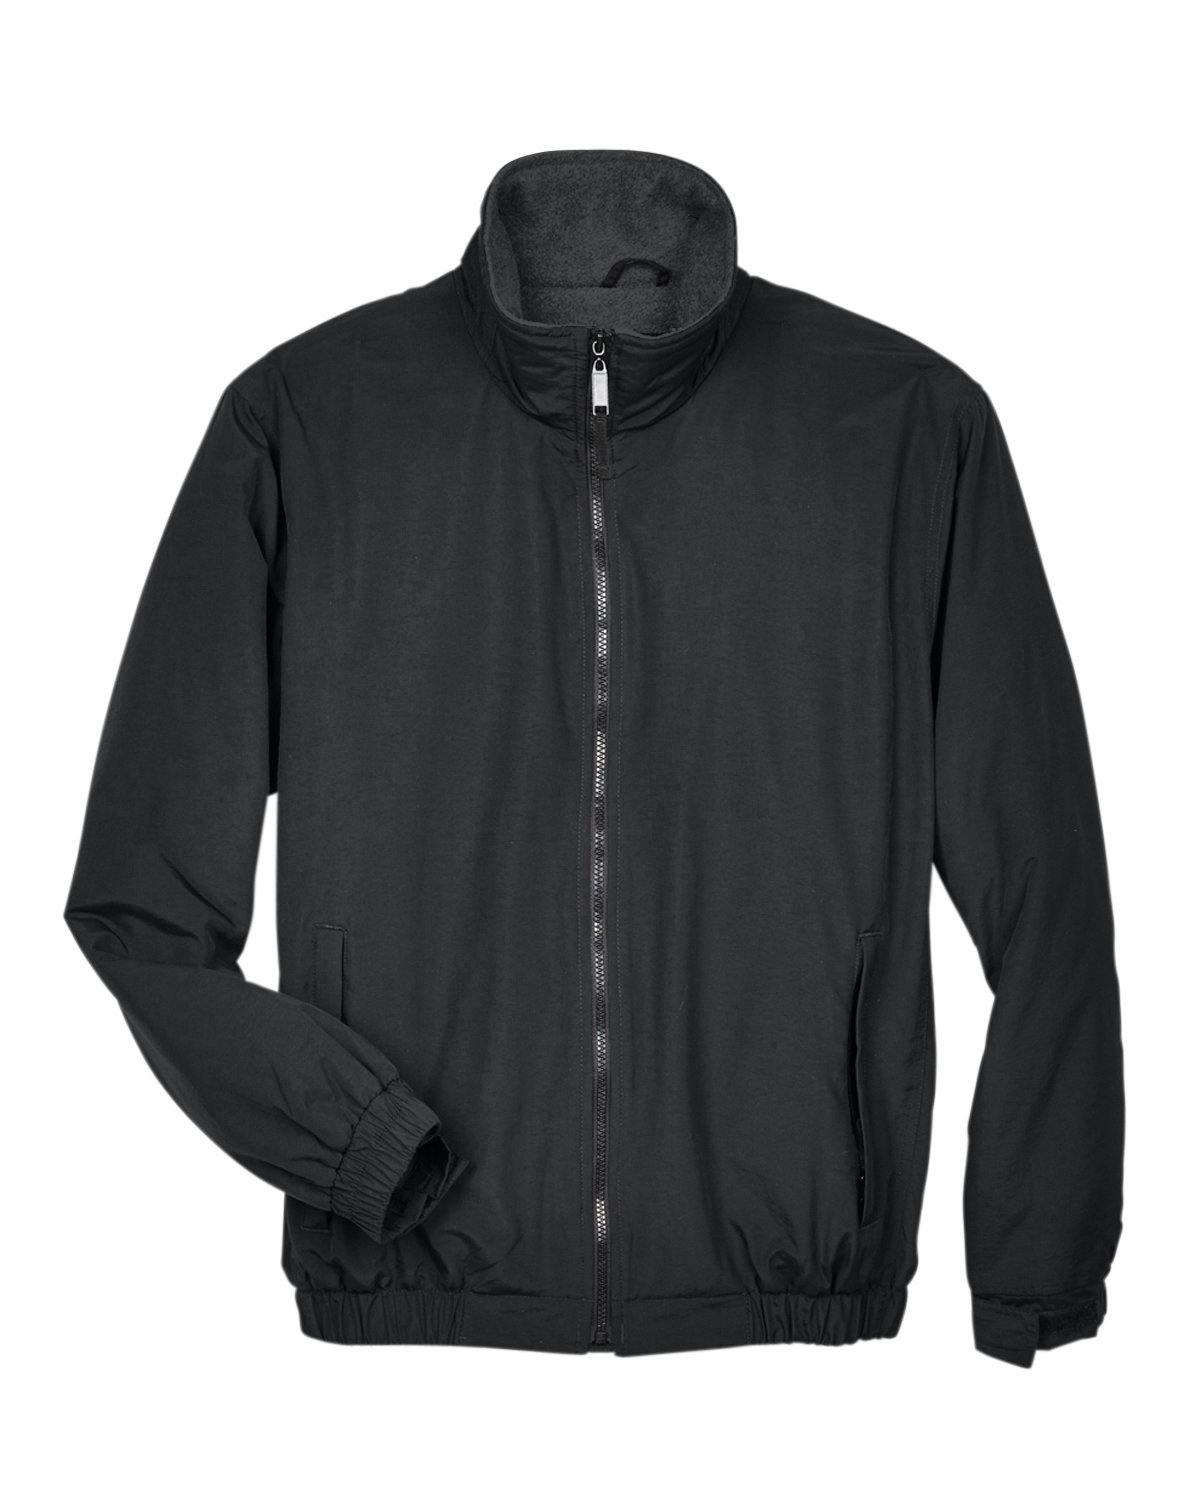 Image for Adult Adventure All-Weather Jacket